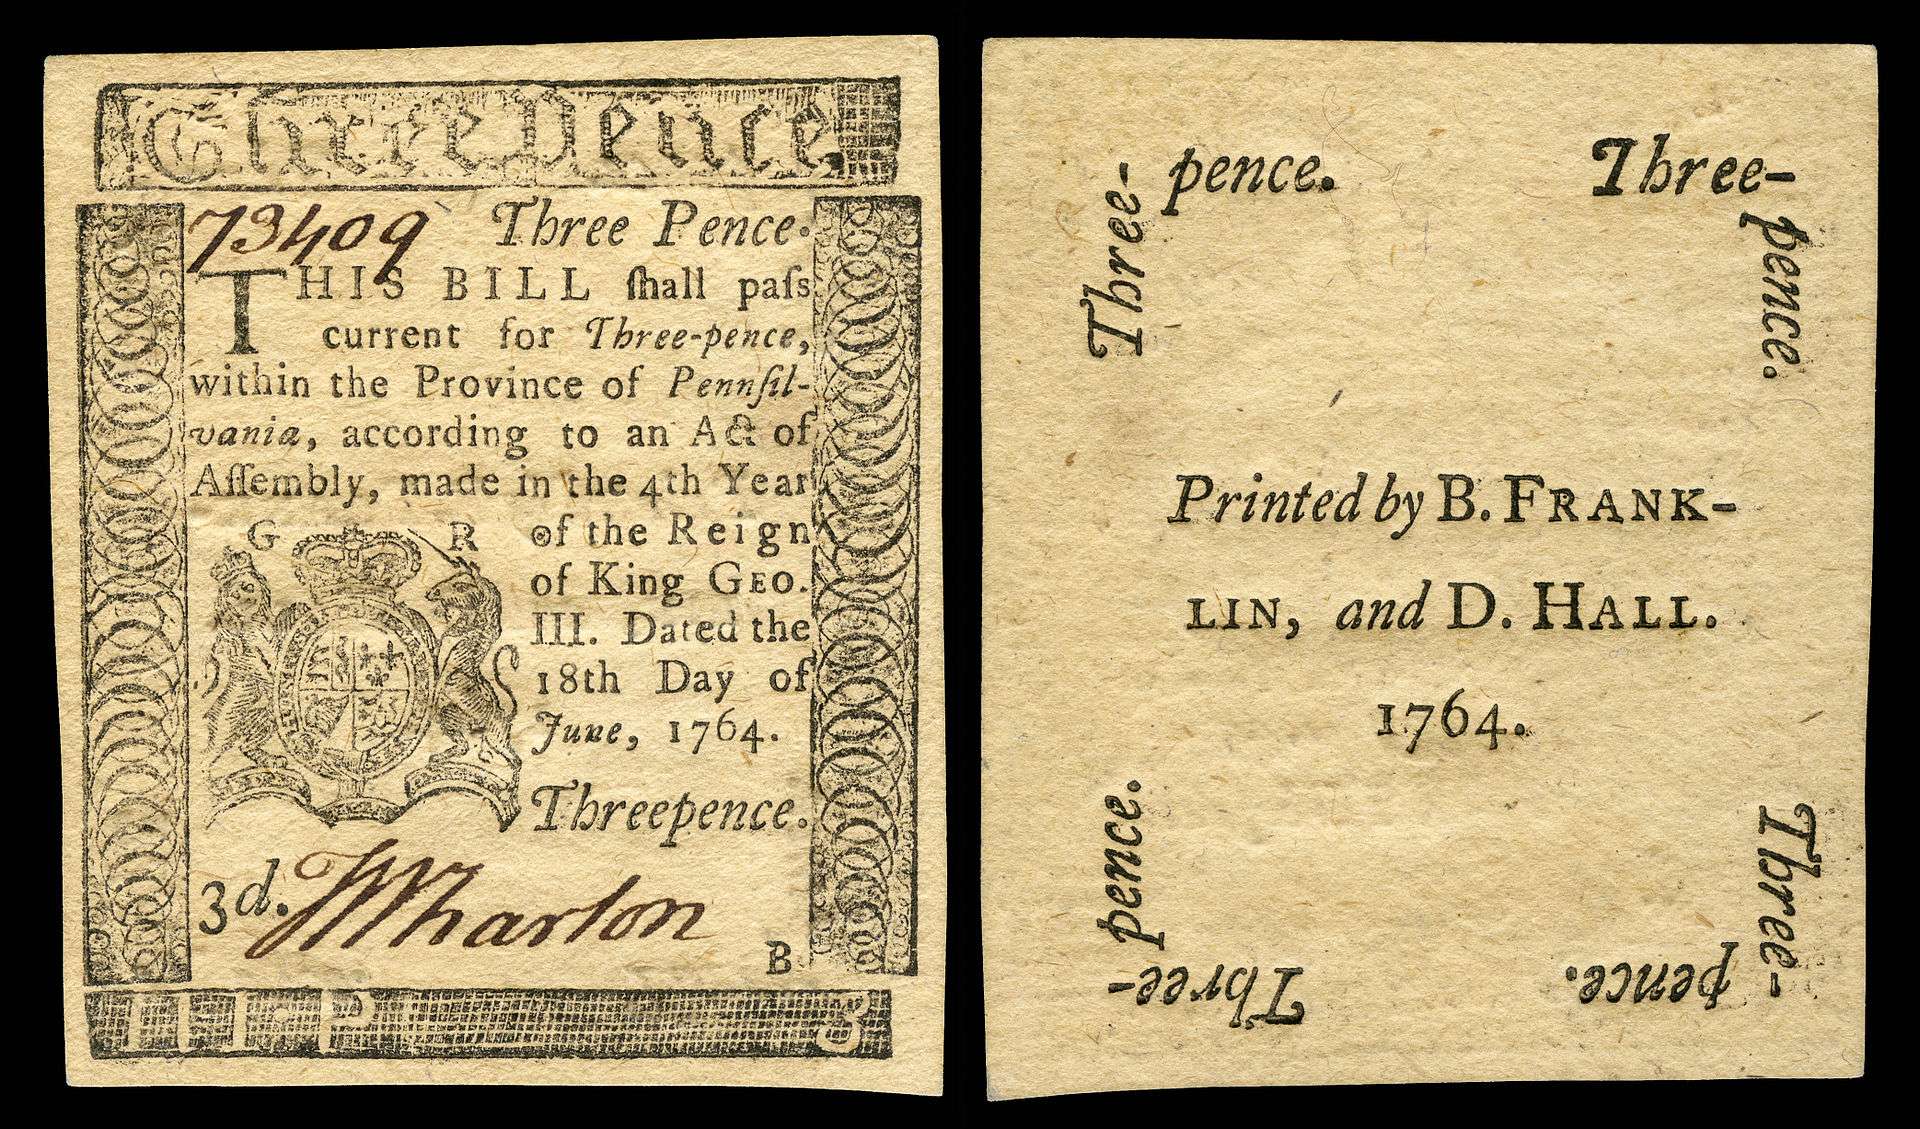 Pennsylvania colonial currency printed by Franklin in 1764